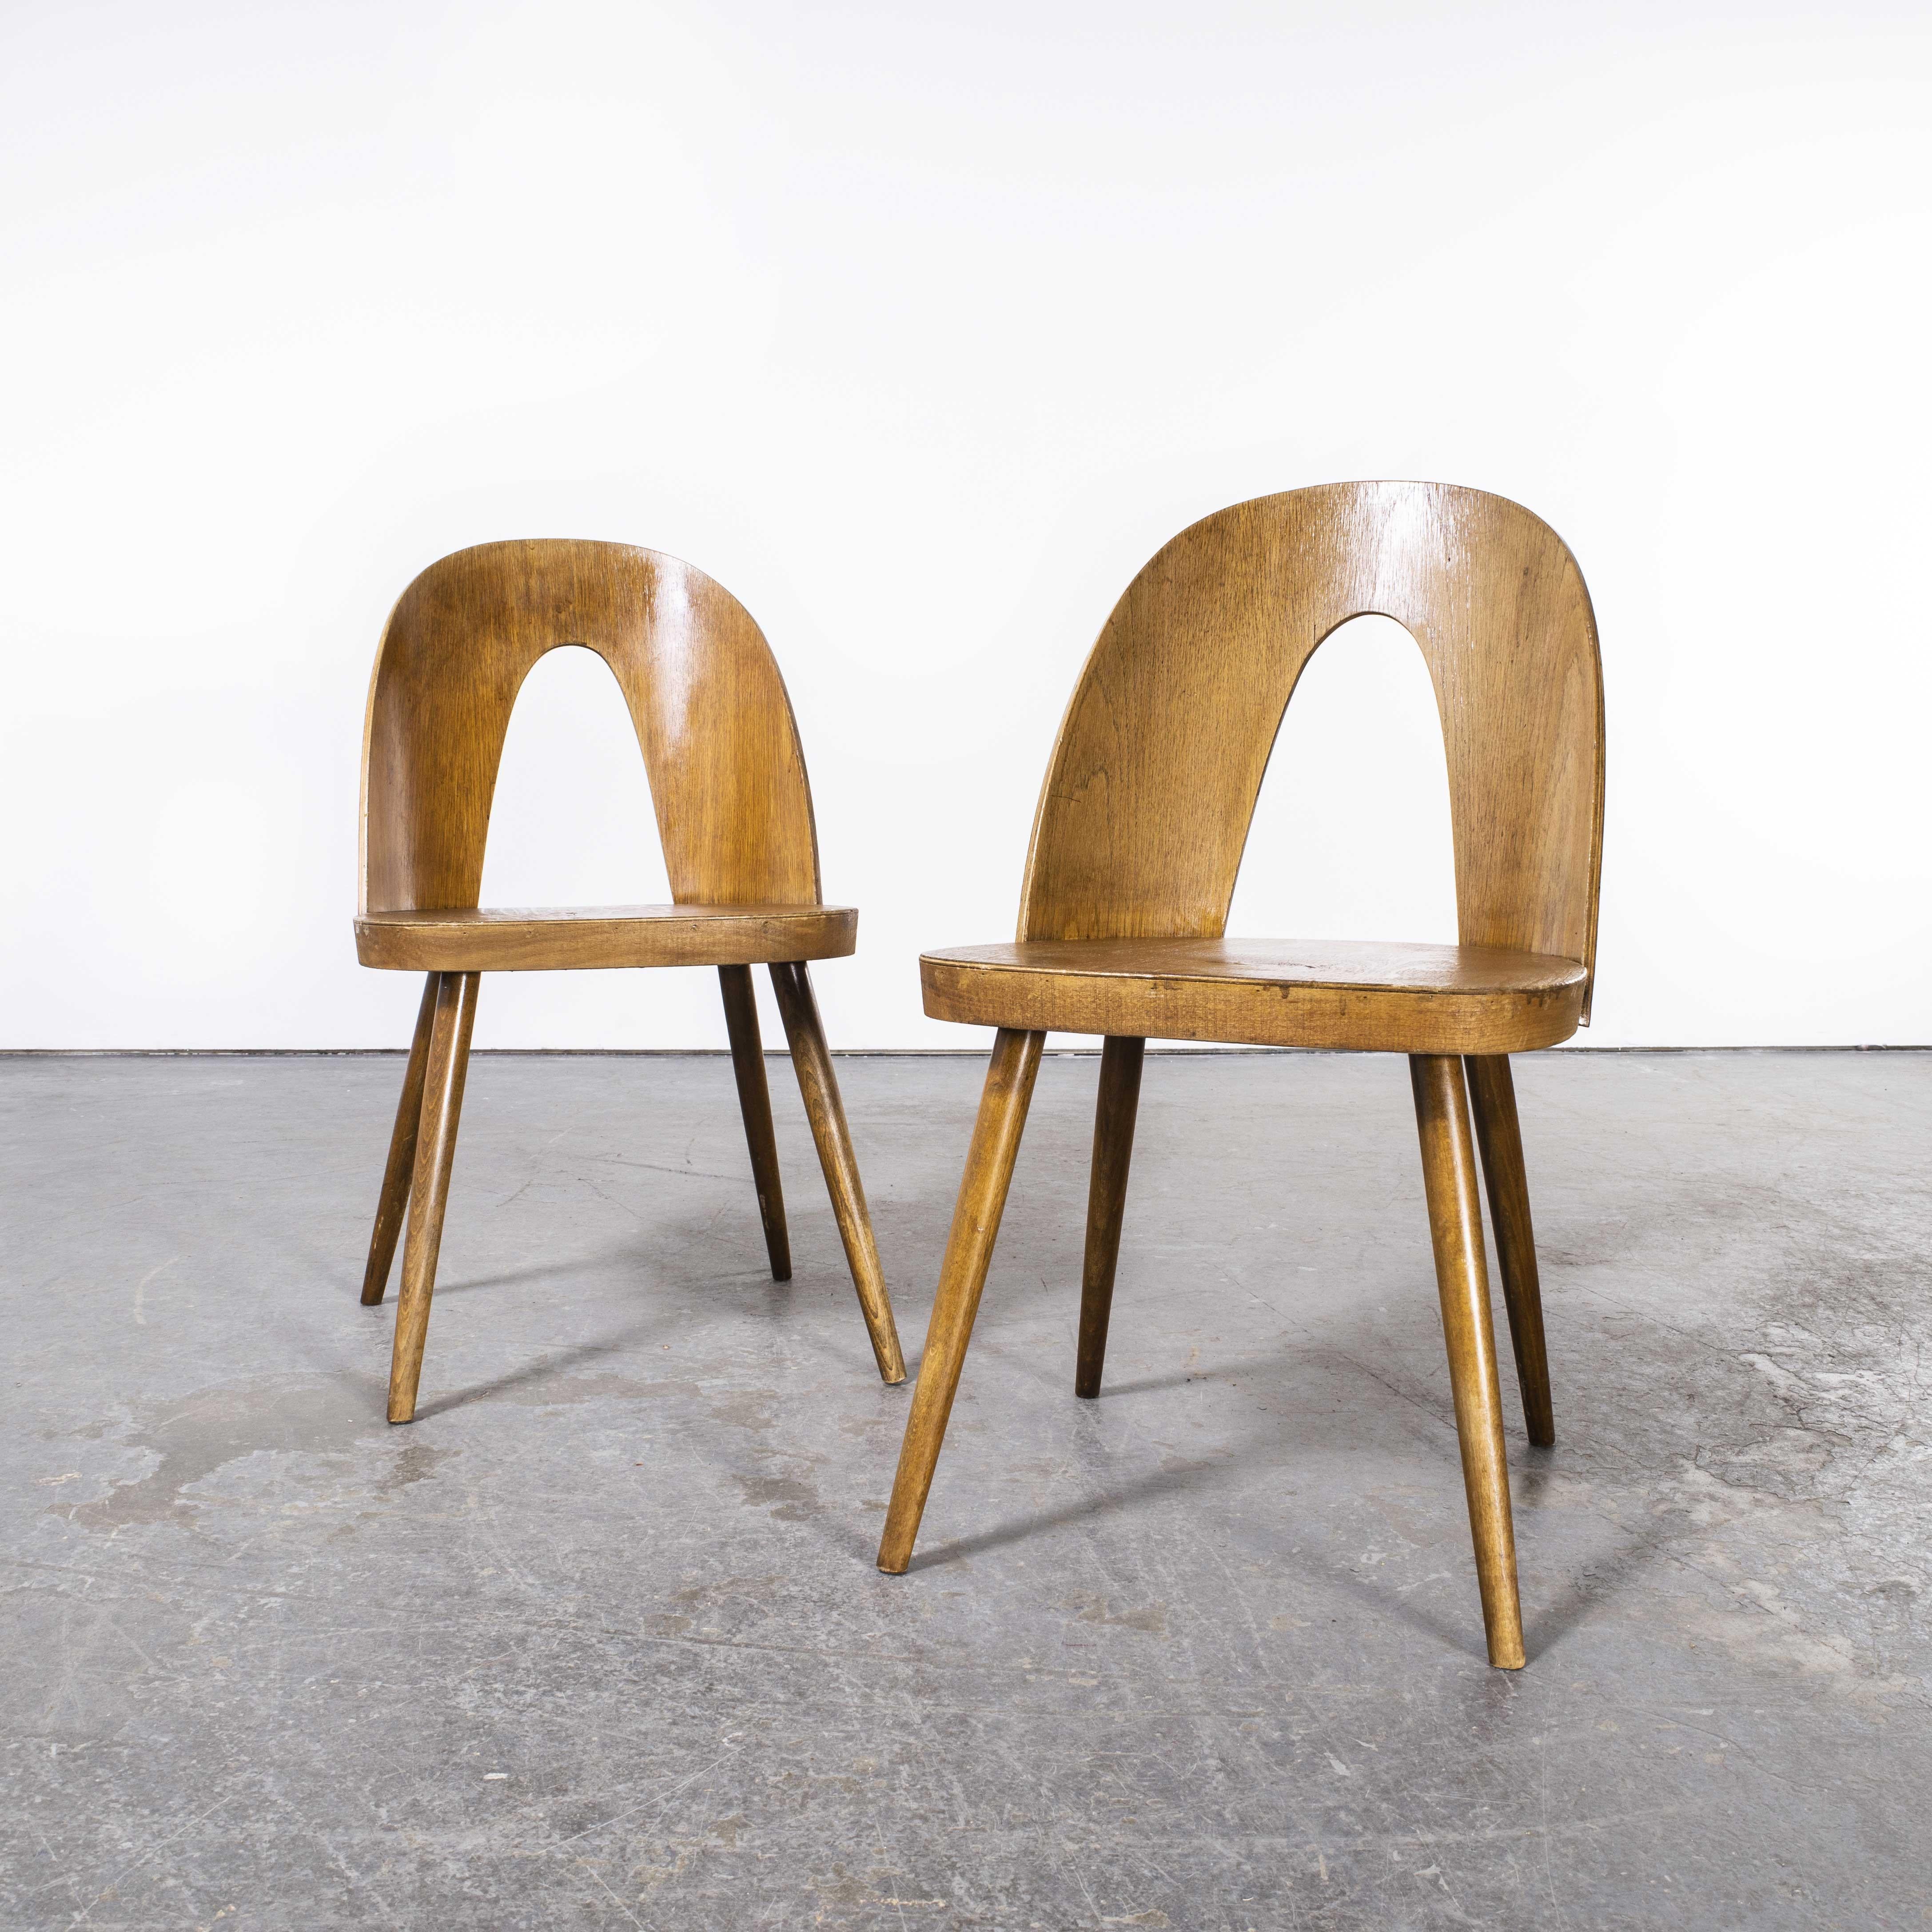 Wood 1960s Side, Dining Chairs by Antonin Suman for Ton, Pair For Sale